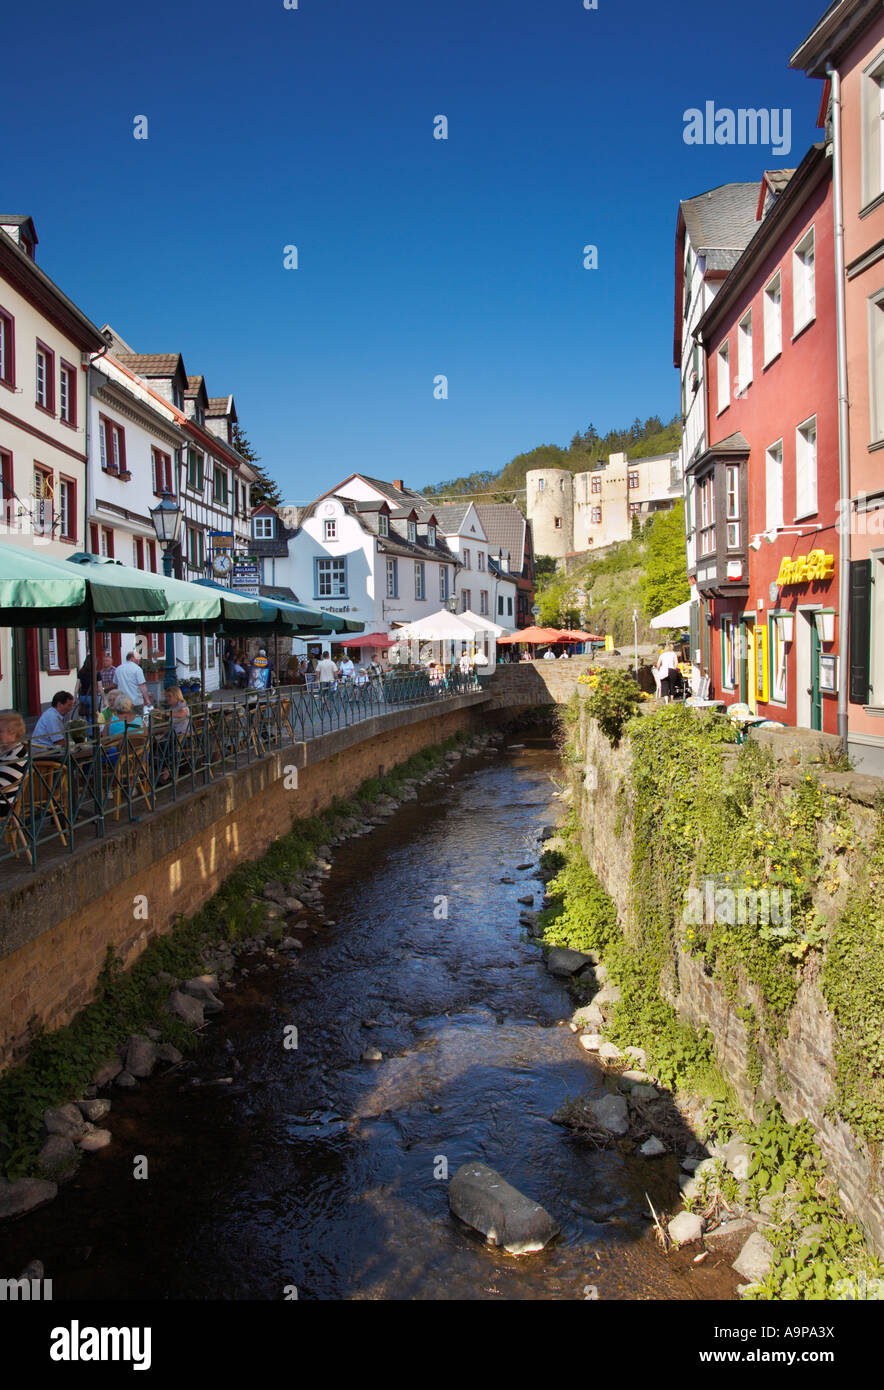 Pavement cafes by the River Erft in Bad Munstereifel old town, Germany, Europe Stock Photo